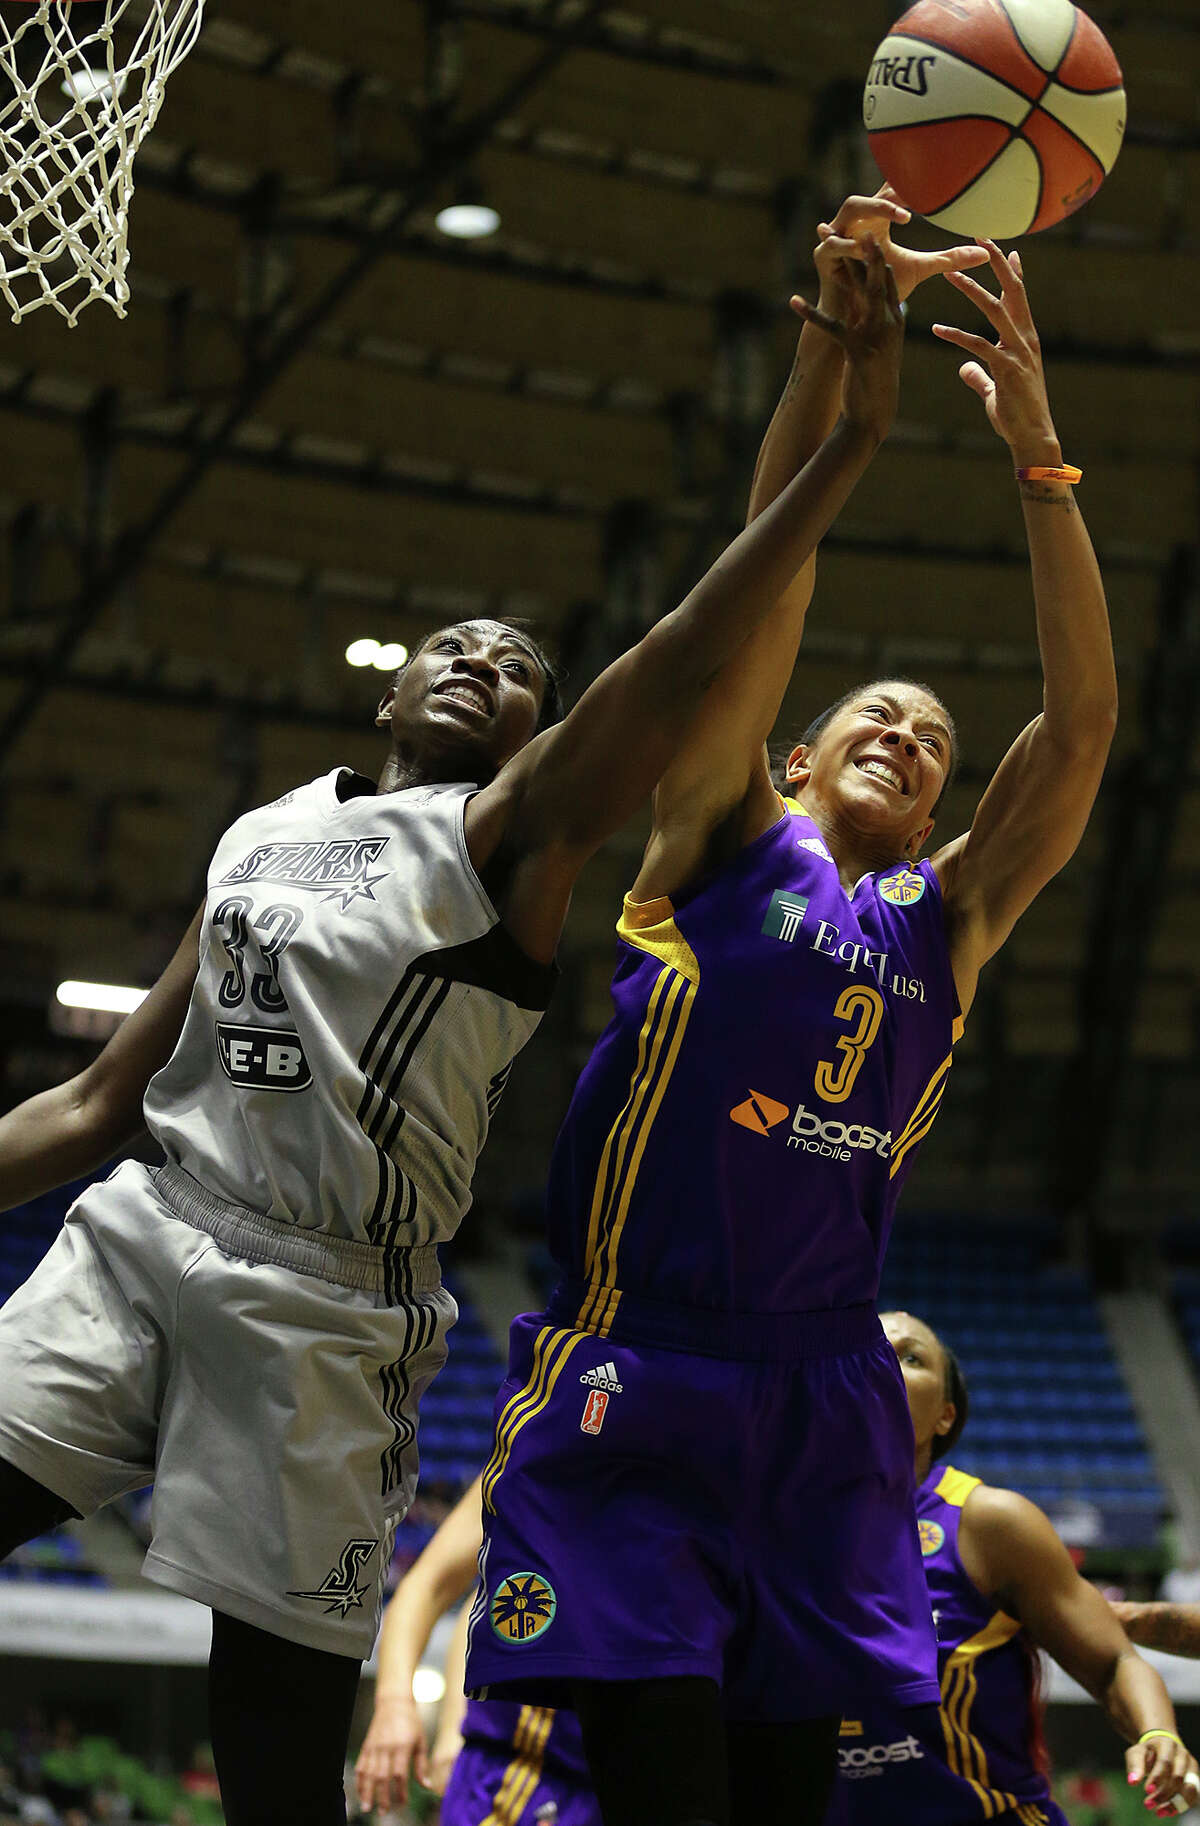 San Antonio Stars’ Sophia Young-Malcolm and Los Angeles Sparks’ Candace Parker struggle for a rebound during the first half at the Freeman Coliseum, Sunday, August 23, 2015.